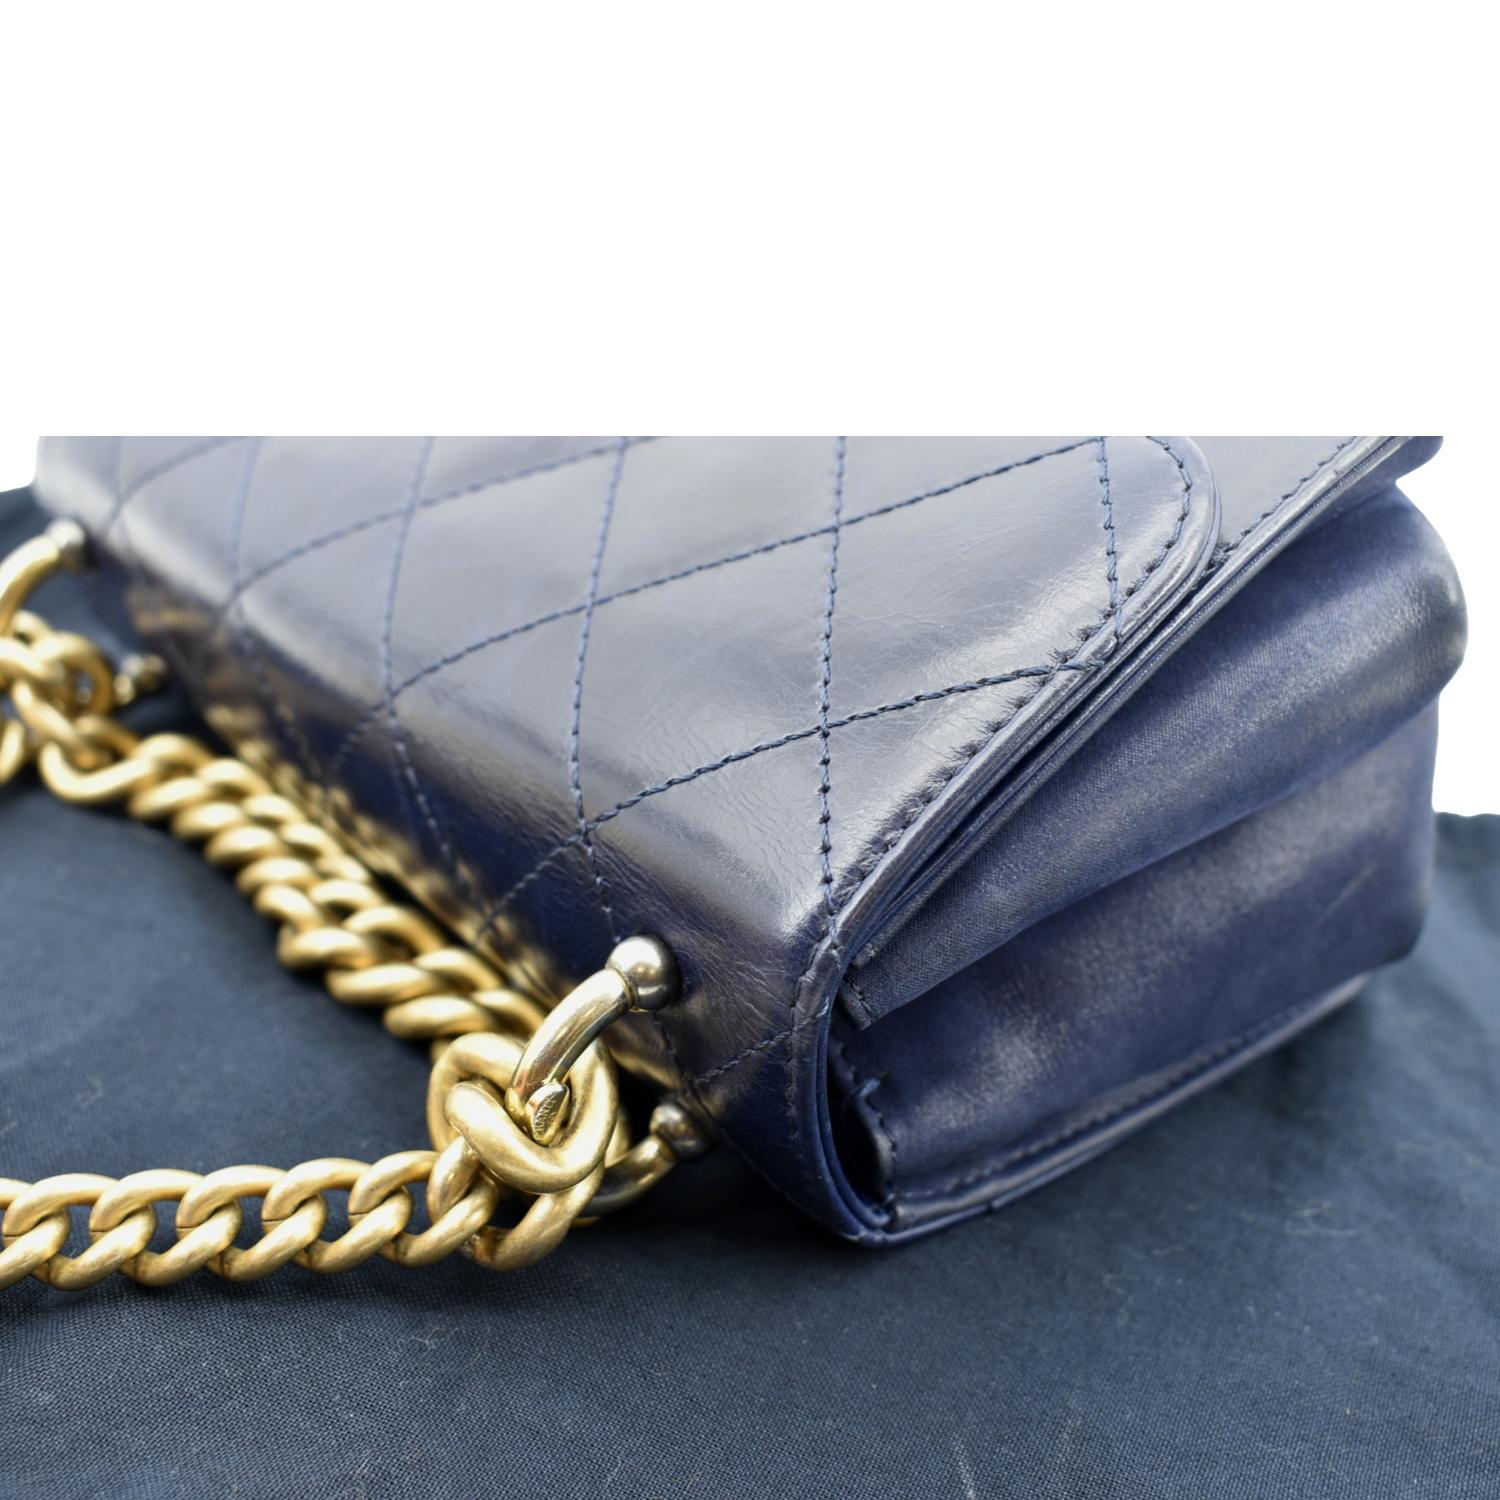 Chanel Navy Quilted Lambskin Vintage Medium Classic Double Flap Bag in Blue